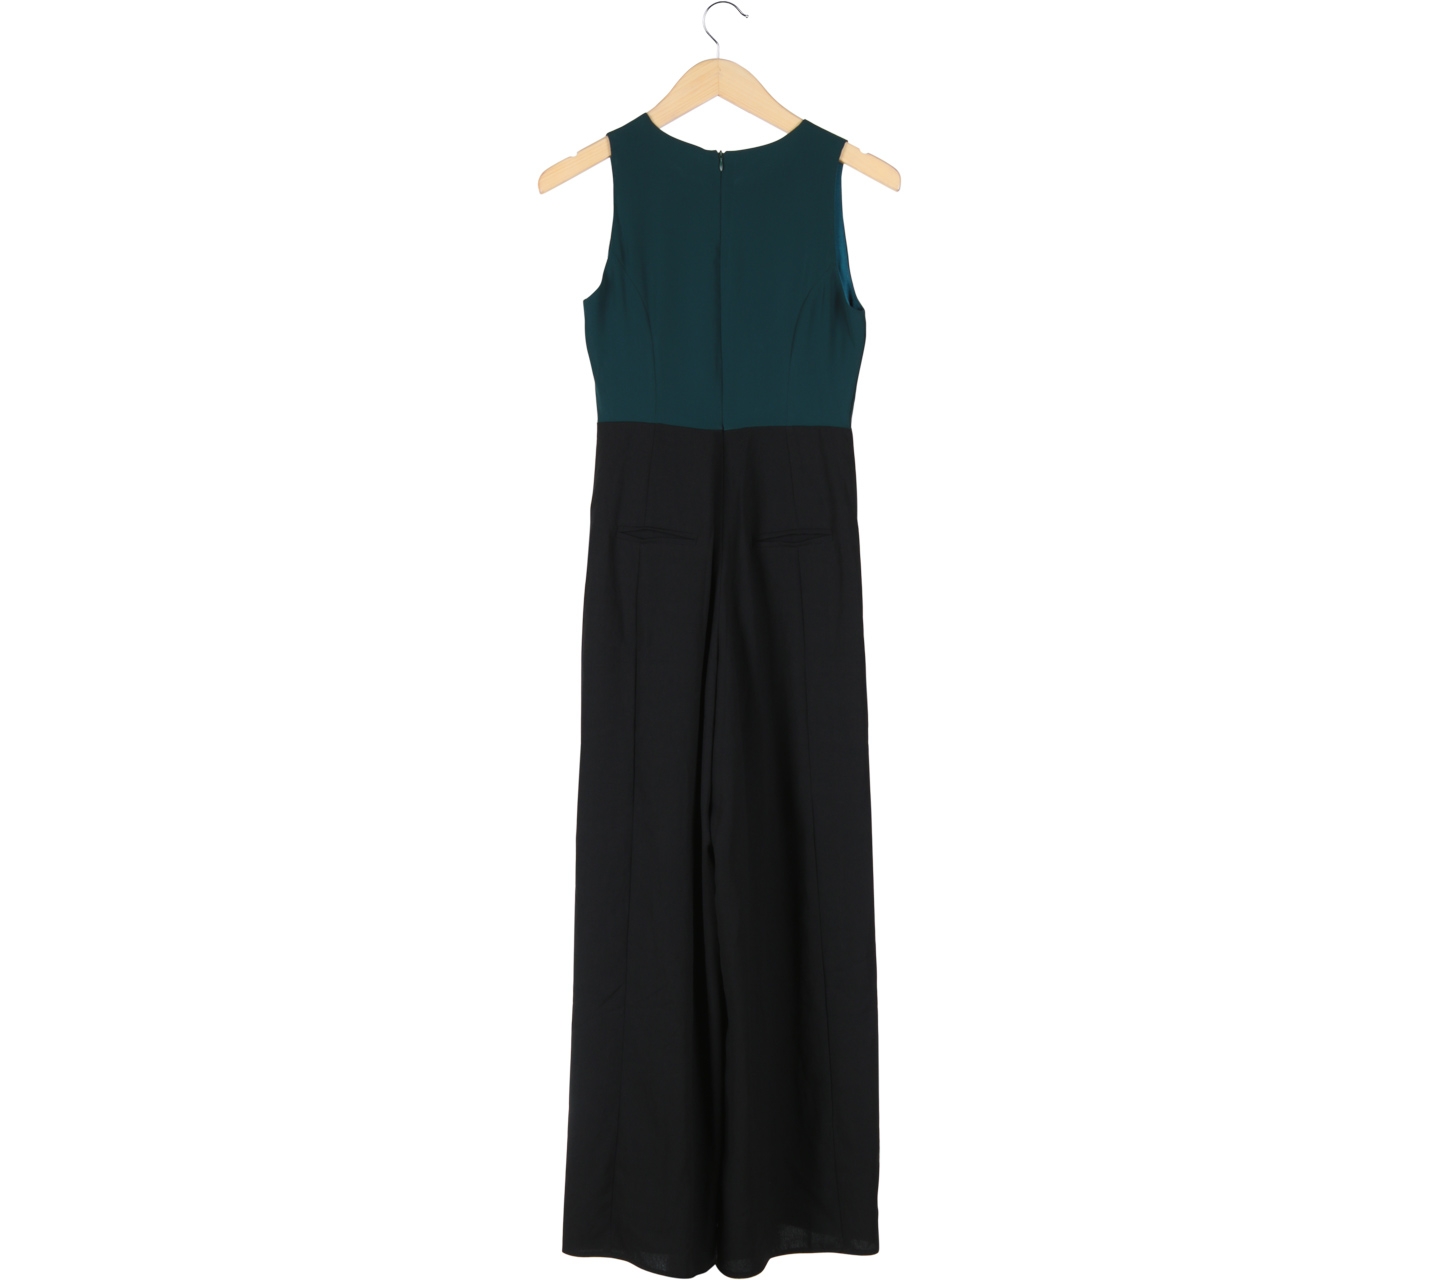 Green And Black Sleeveless Jumpsuit